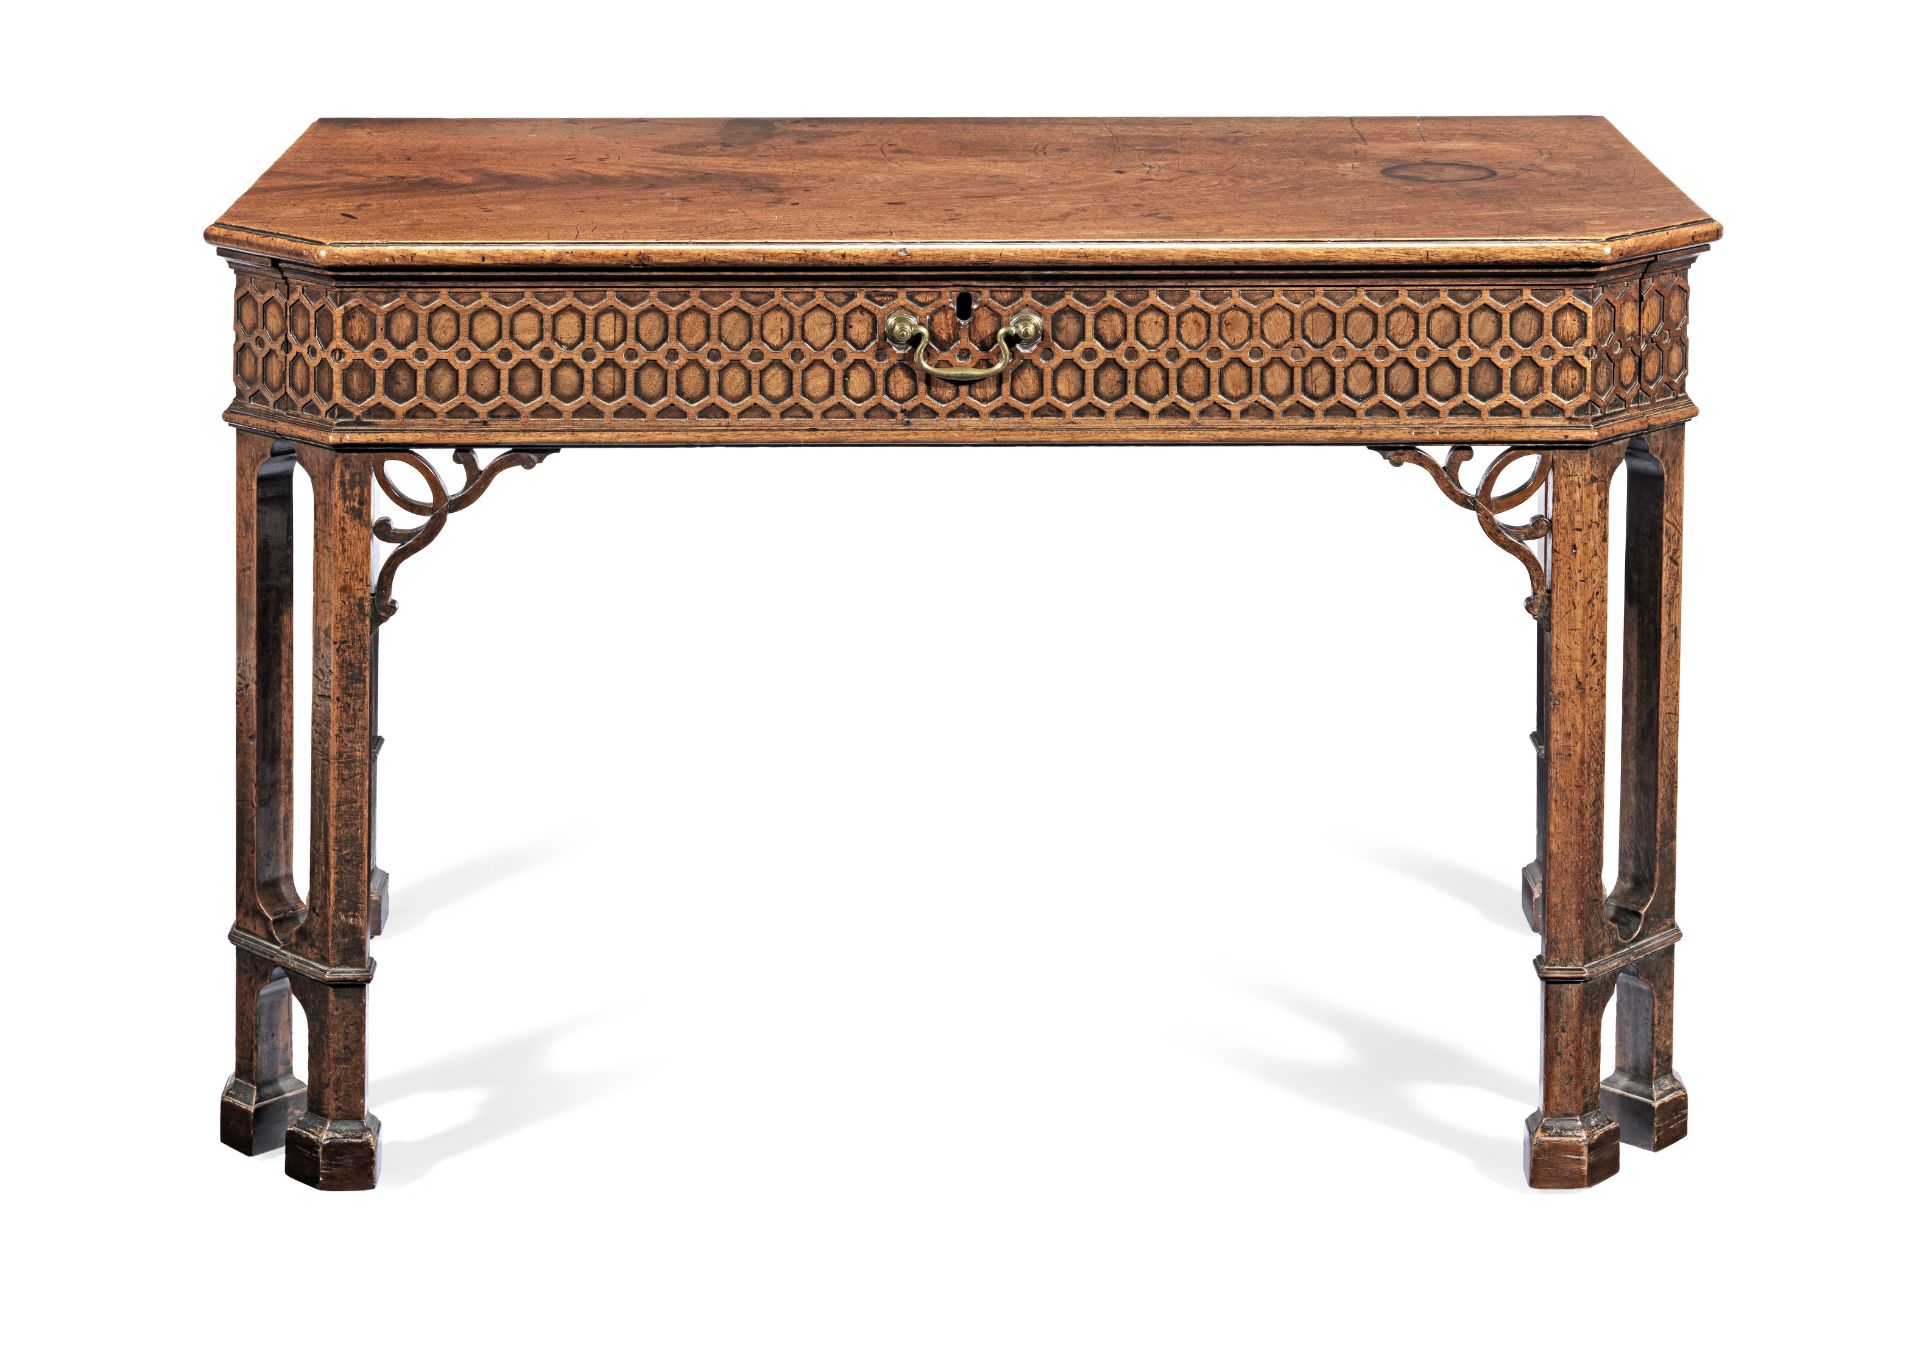 A George III mahogany writing table after a design by Thomas Chippendale